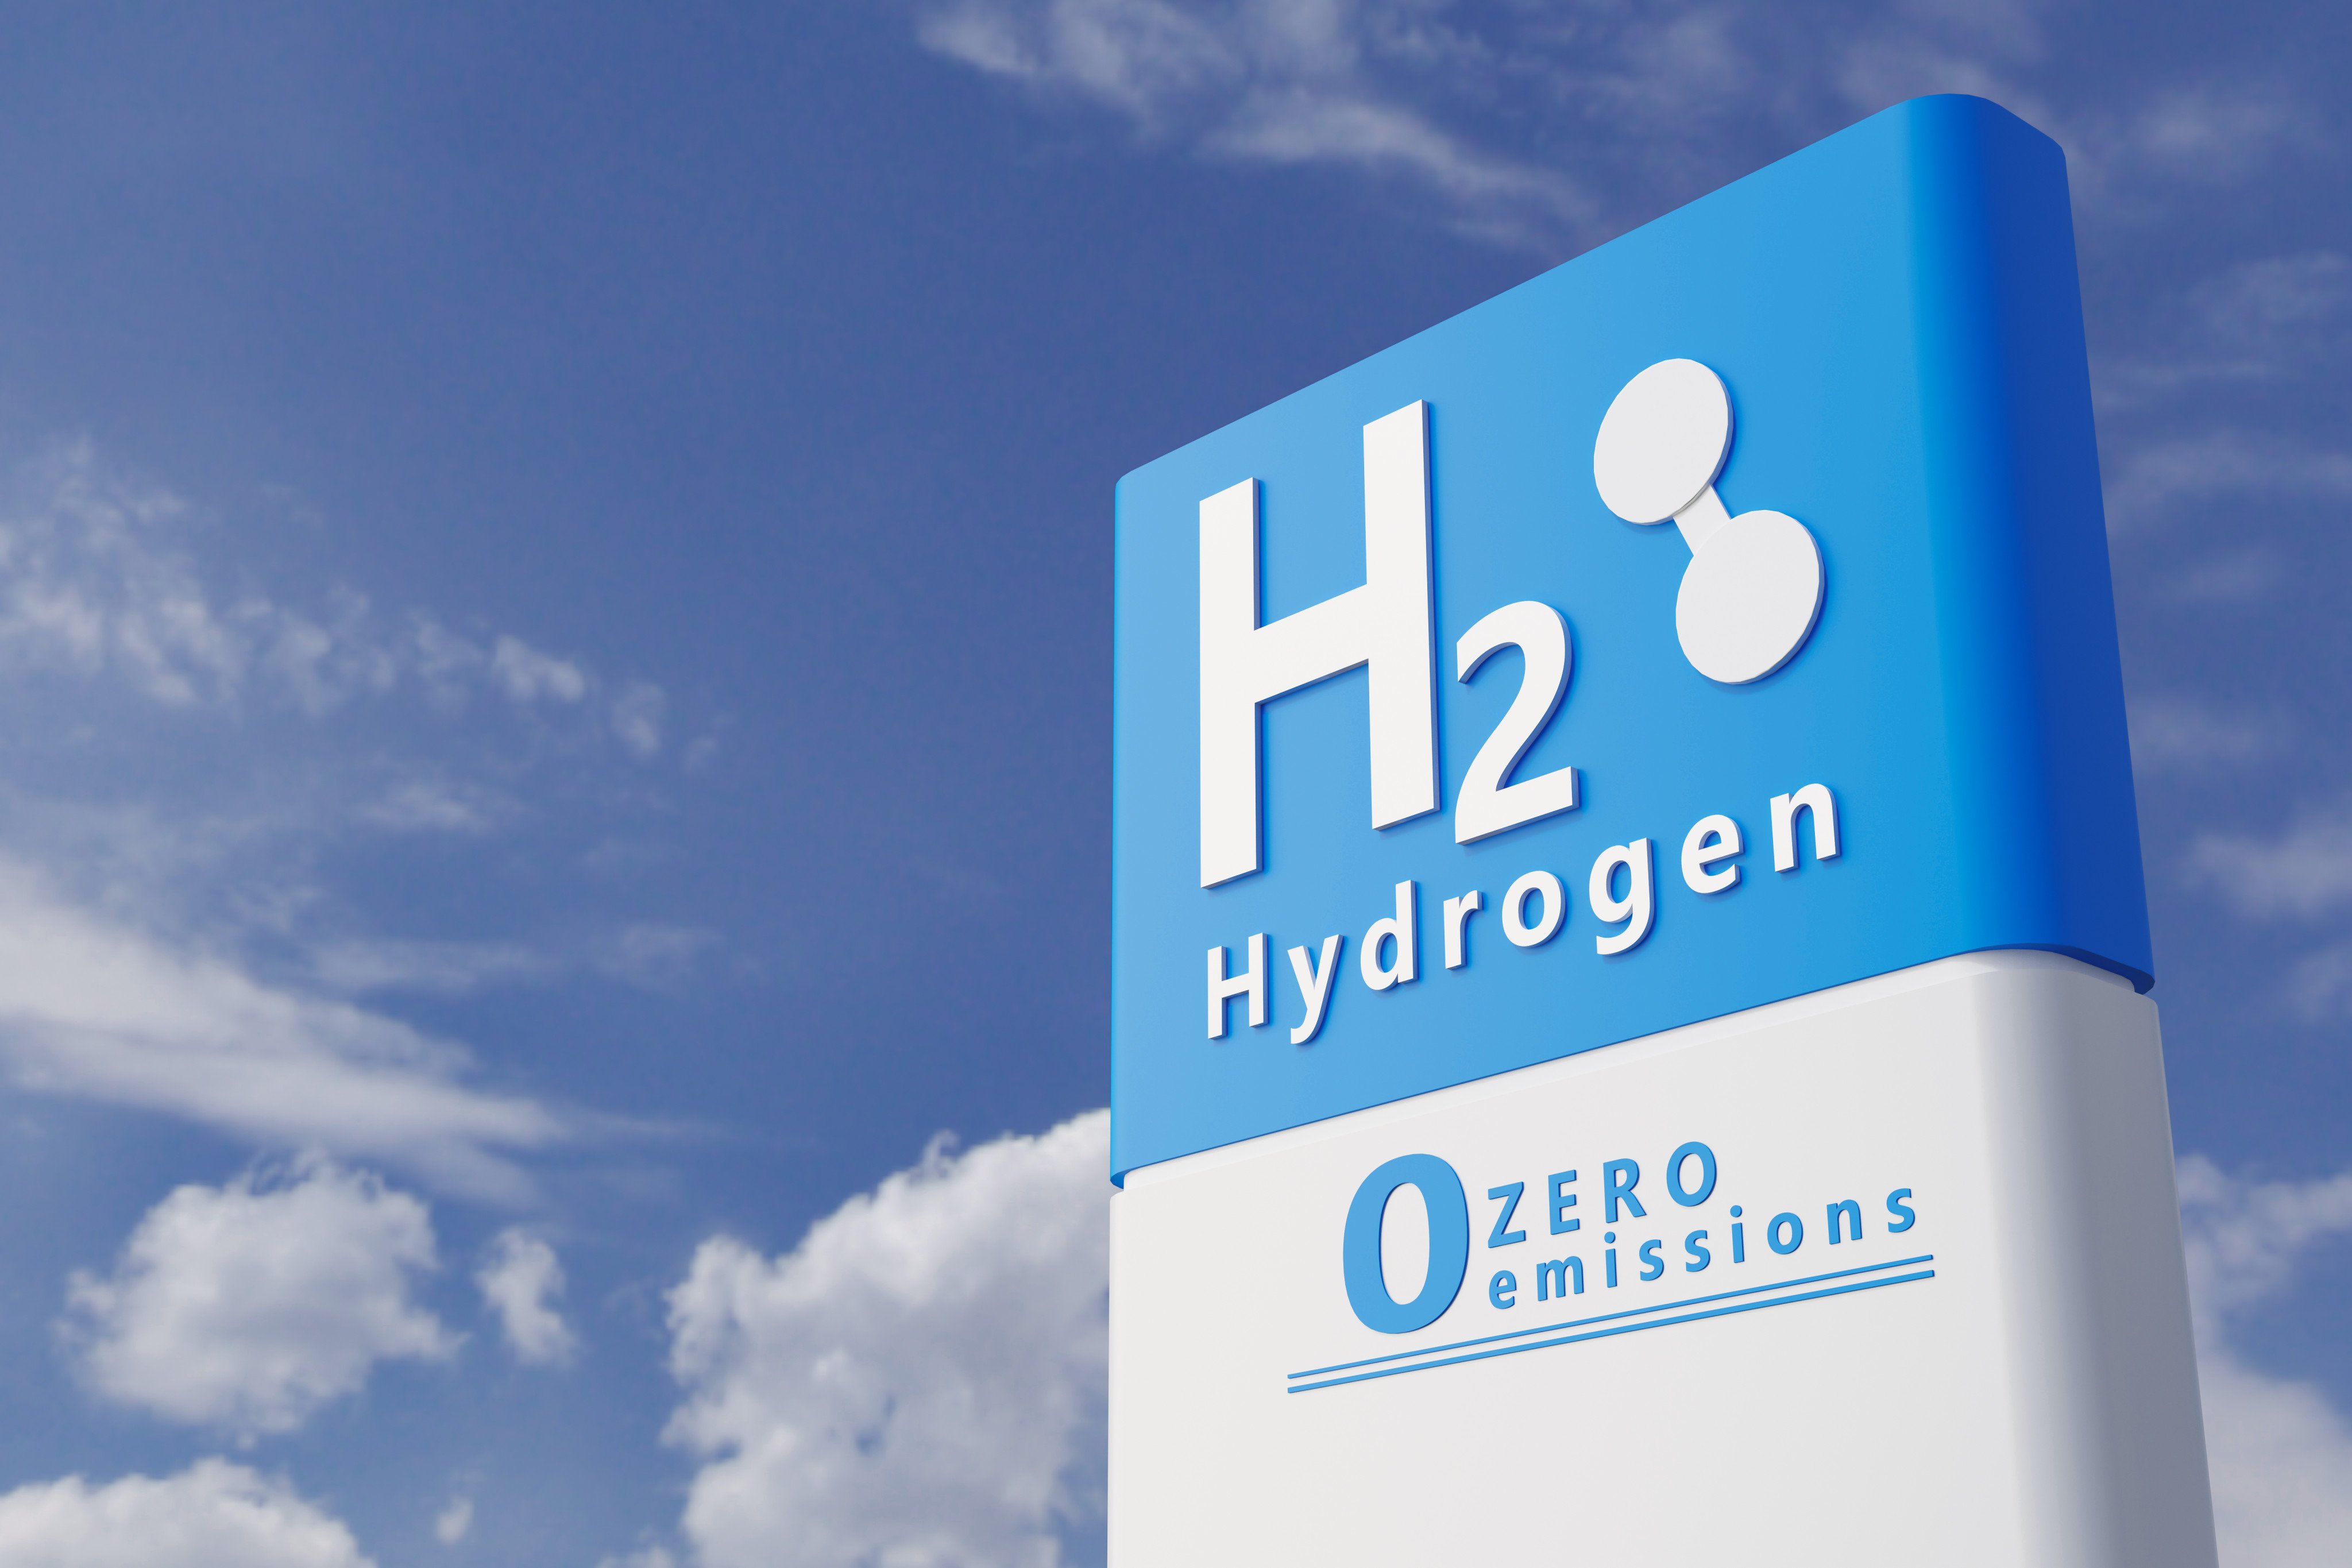 China’s hydrogen sector is expected to see strong growth as local governments announce ambitious plans to produce quantities of the gas that far exceed the national target, analysts said. Photo: Shutterstock